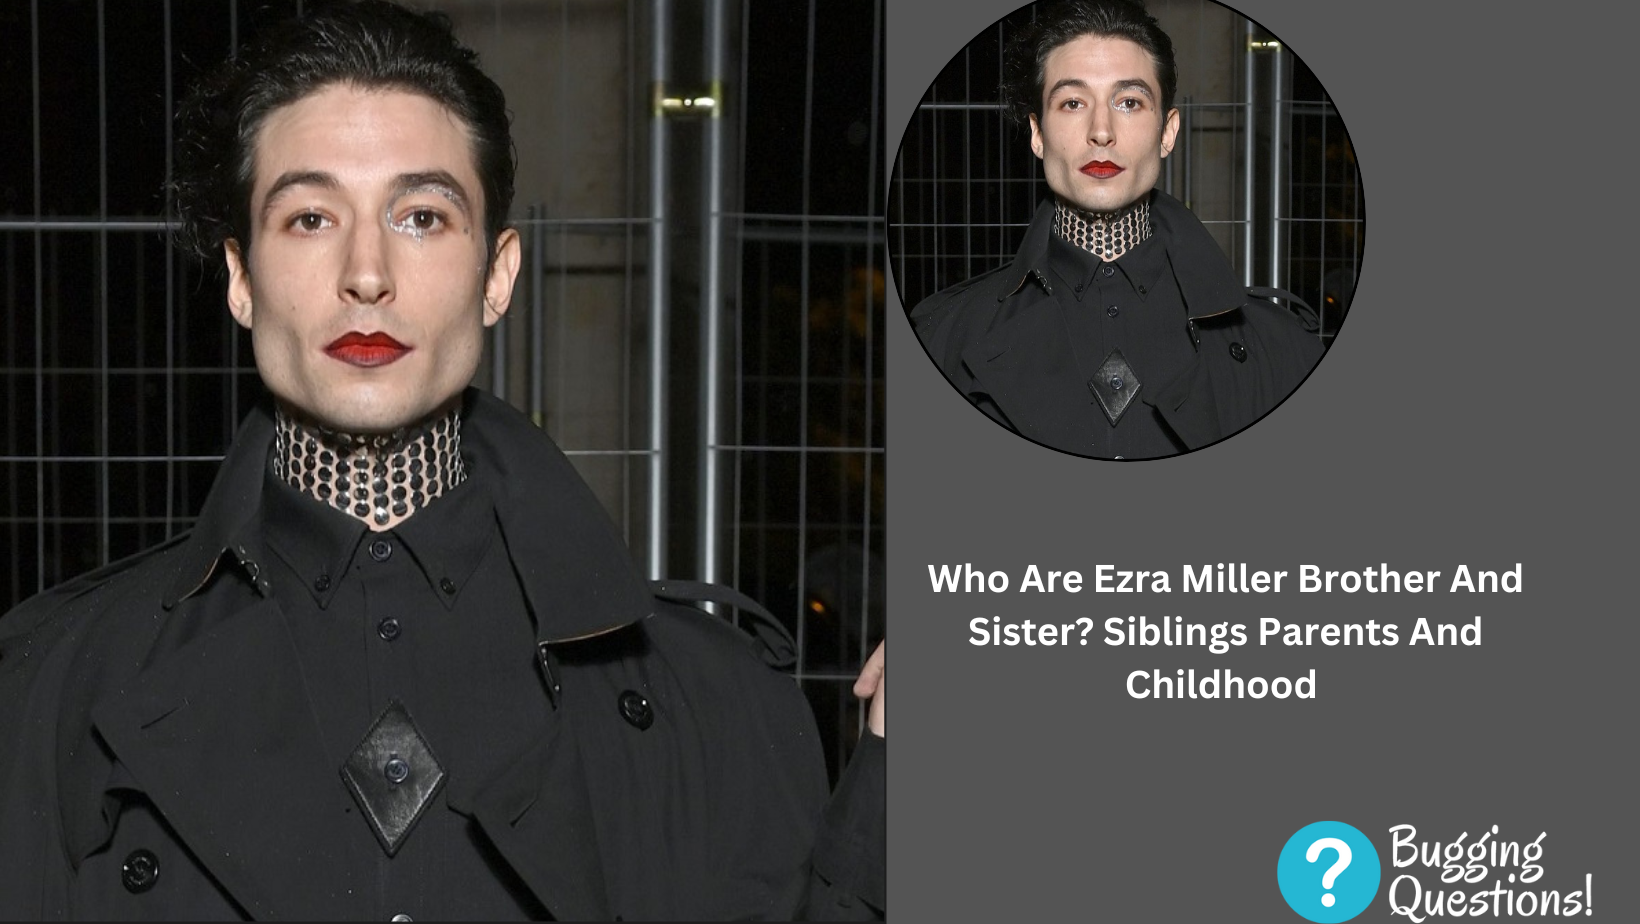 Who Are Ezra Miller Brother And Sister?